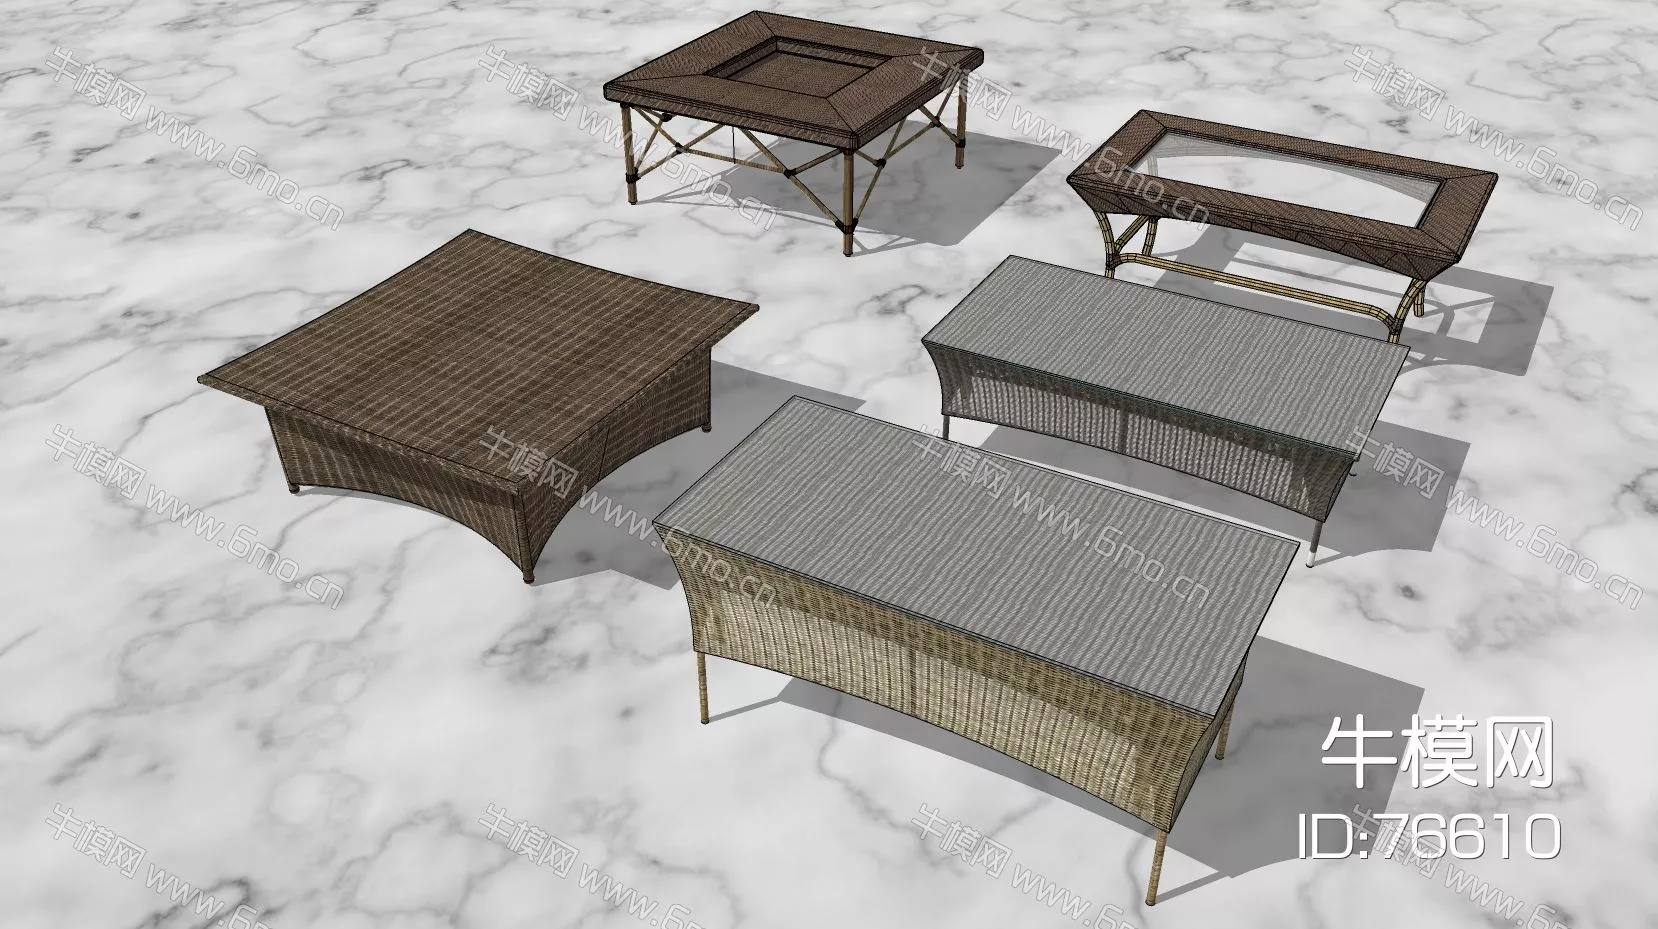 CHINESE COFFEE TABLE - SKETCHUP 3D MODEL - ENSCAPE - 76610